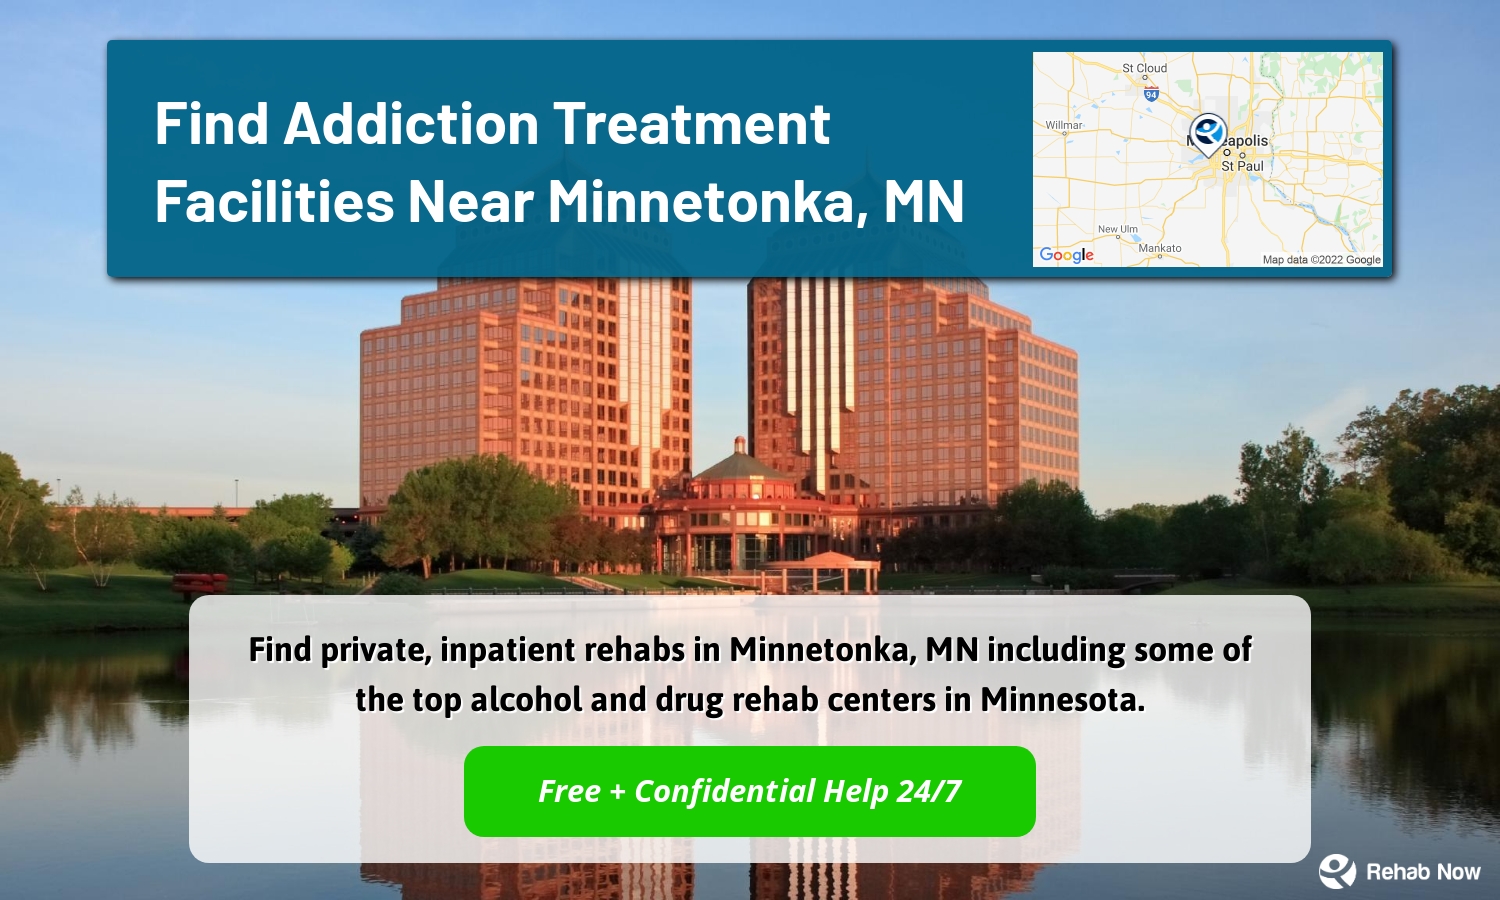 Find private, inpatient rehabs in Minnetonka, MN including some of the top alcohol and drug rehab centers in Minnesota.